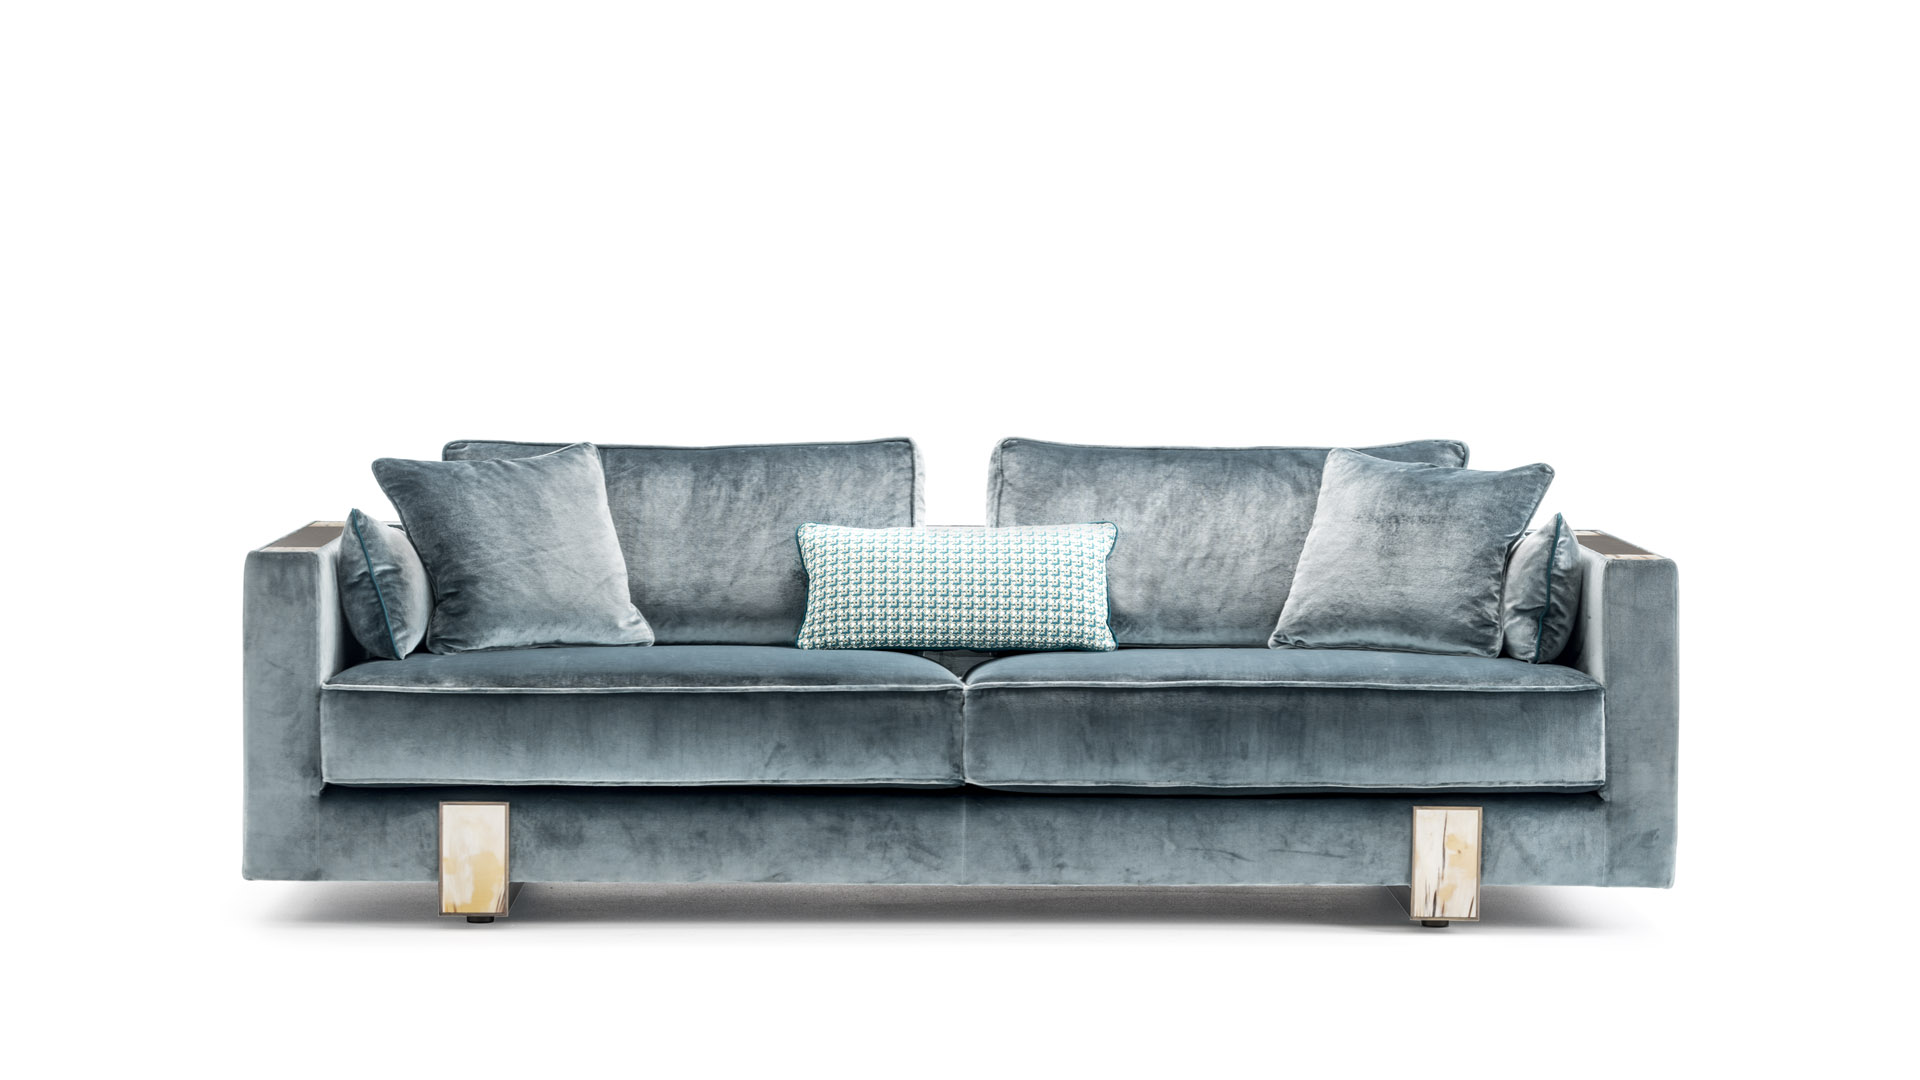 Sofas and seats - Adriano sofa in Splendido velvet with horn details mod. 6036A - cover - Arcahorn